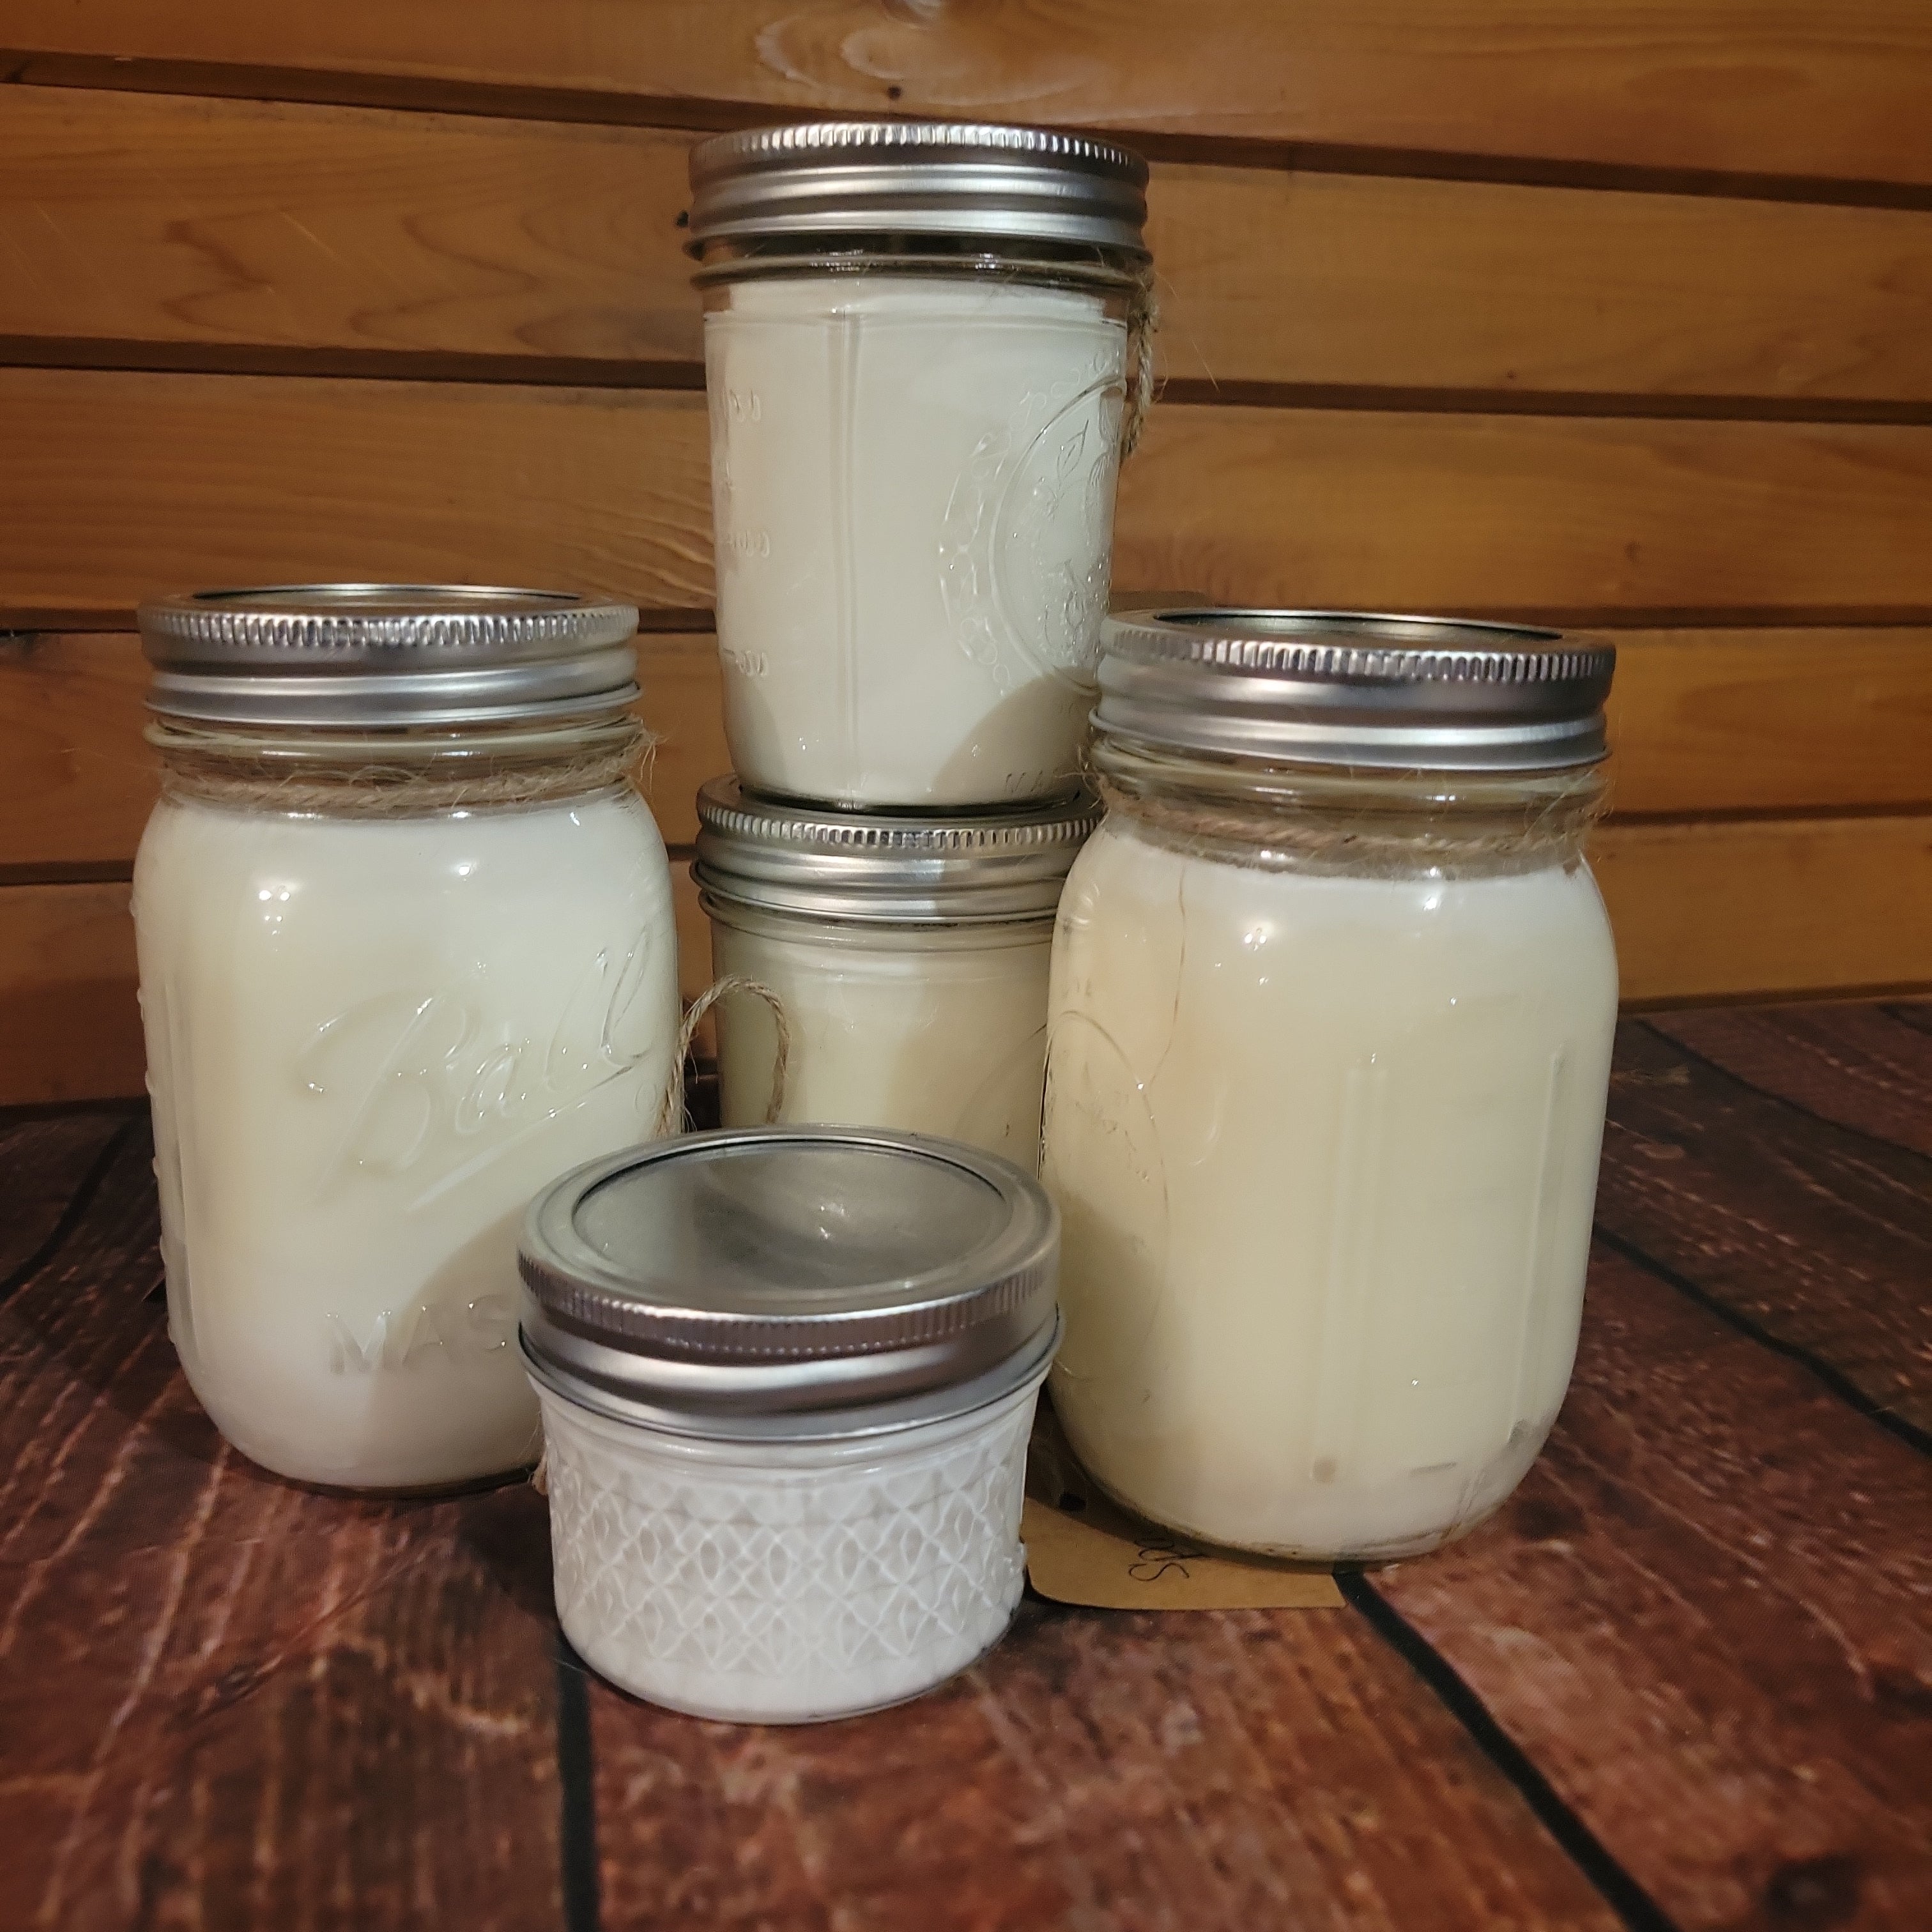 Scents of Home Soy Candles - mason jar candles